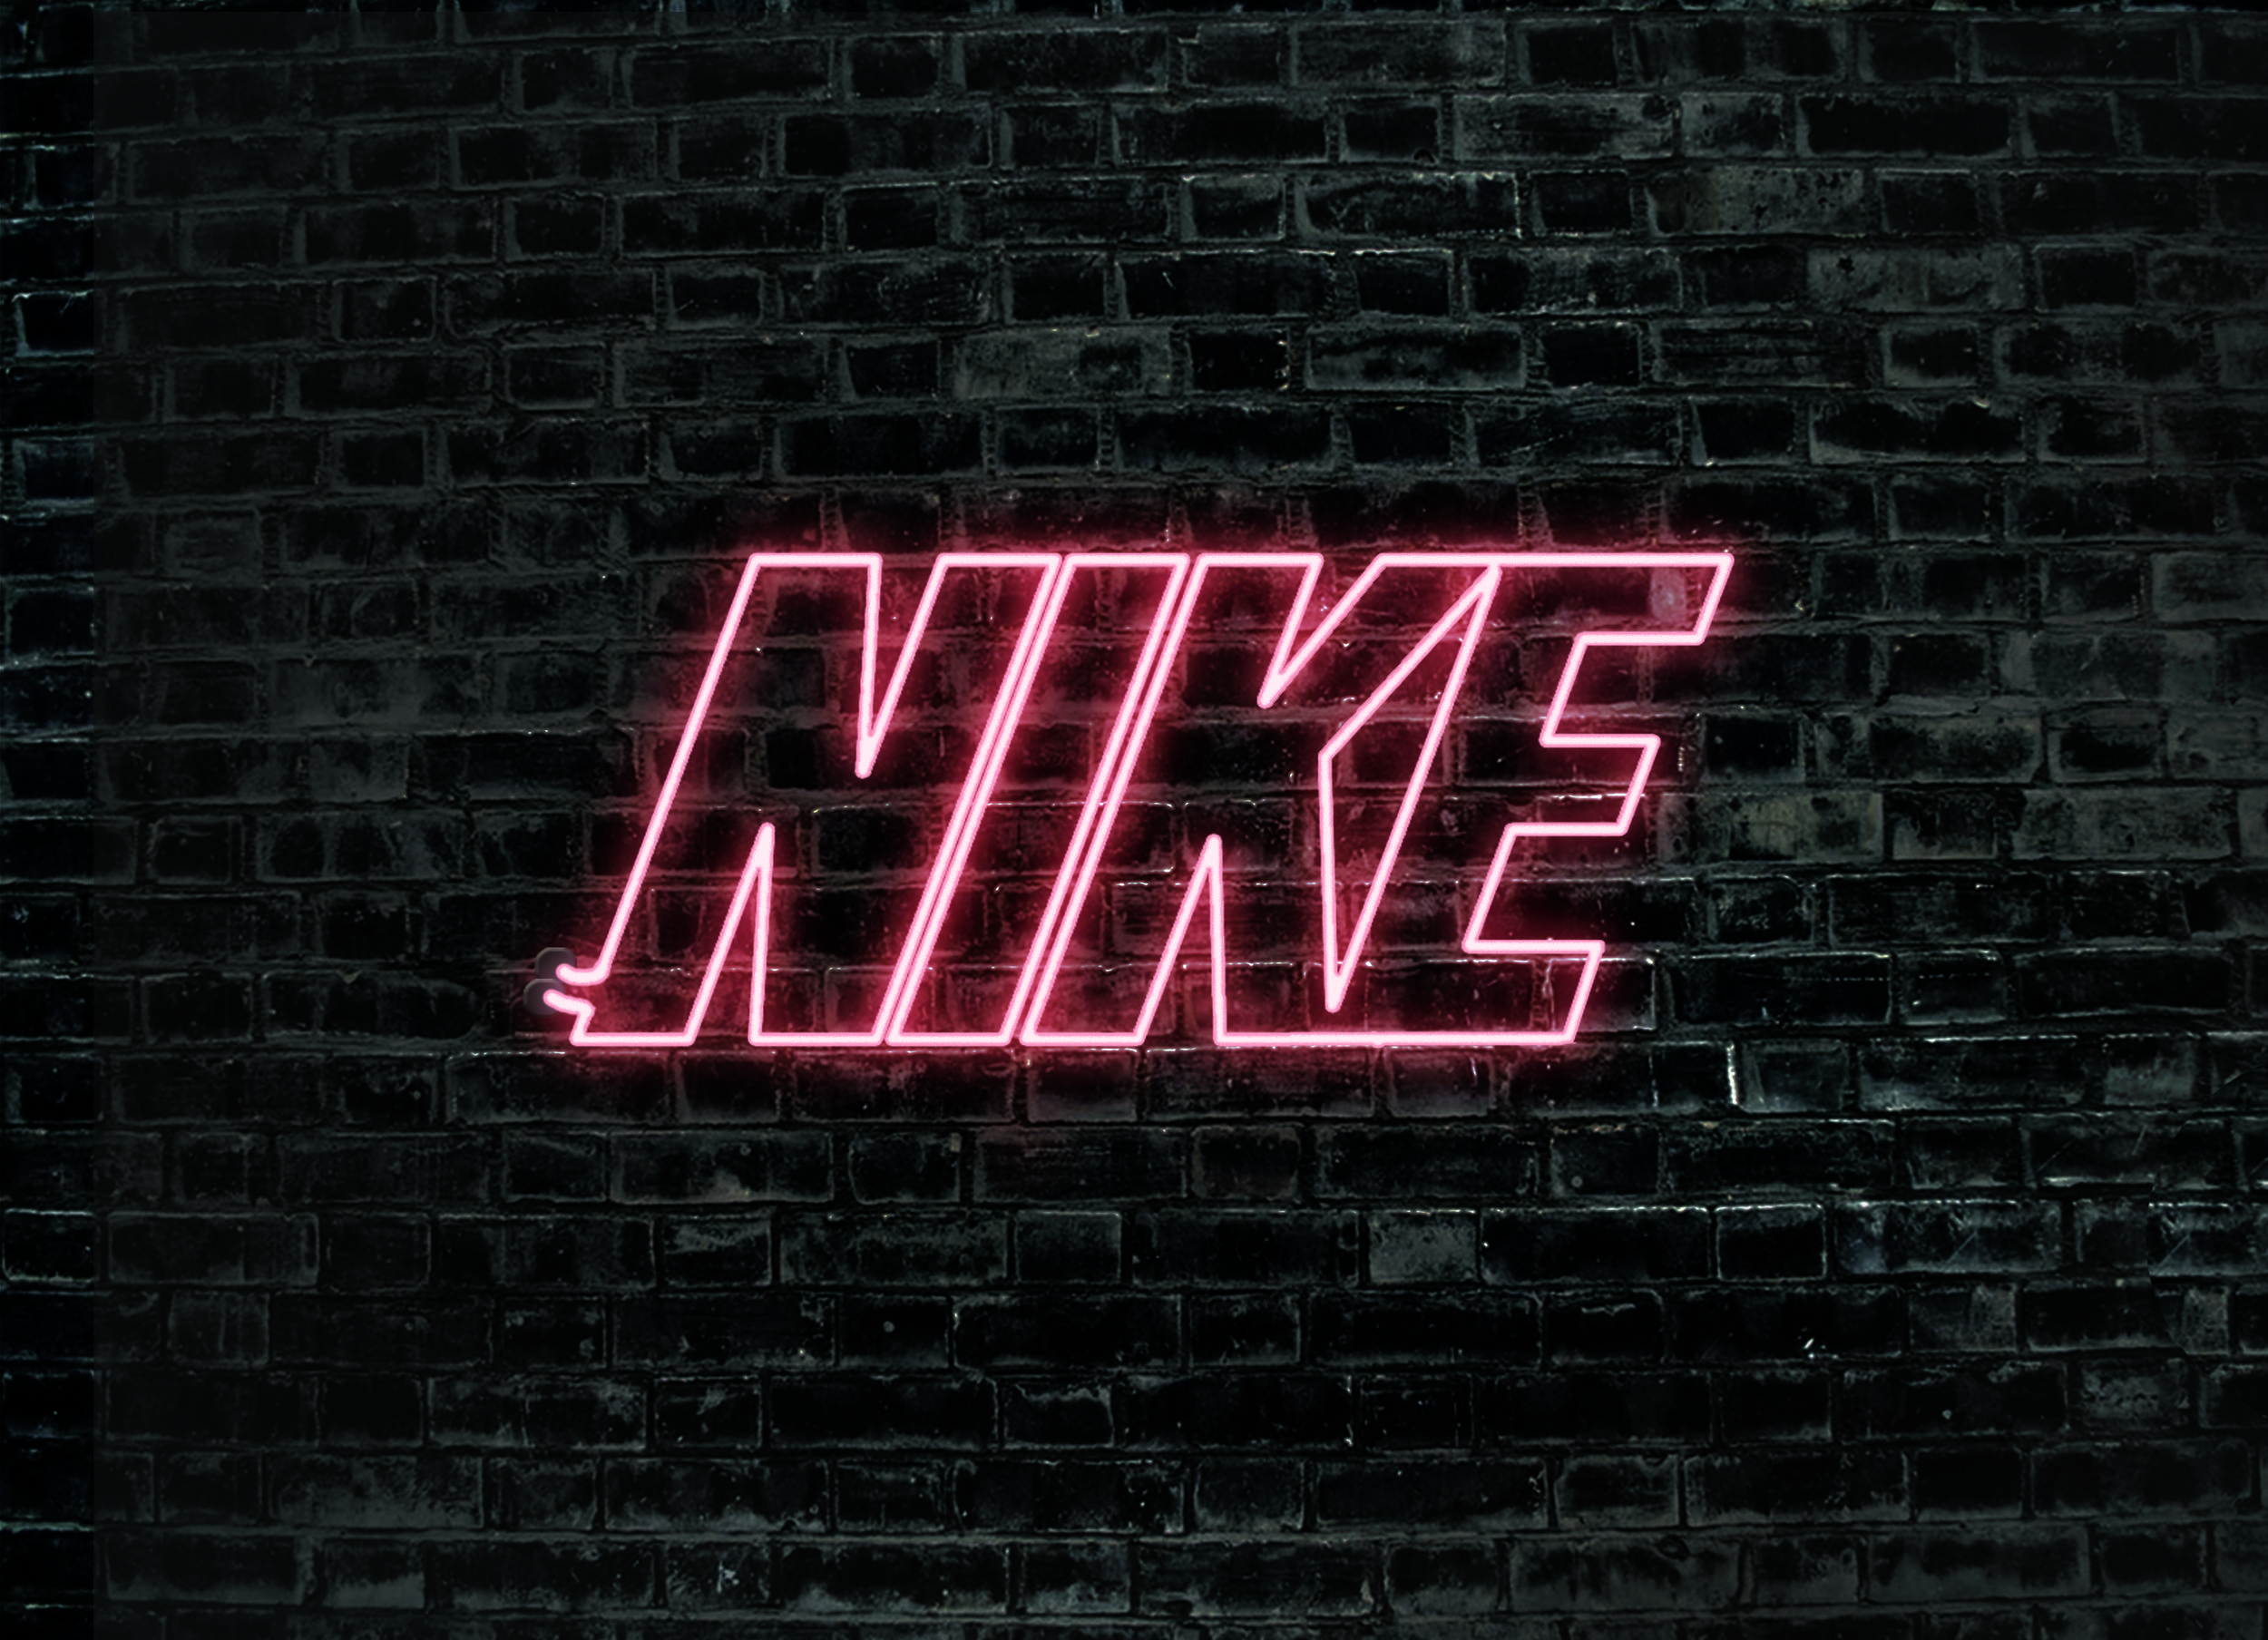 Red Nike Aesthetic Wallpapers